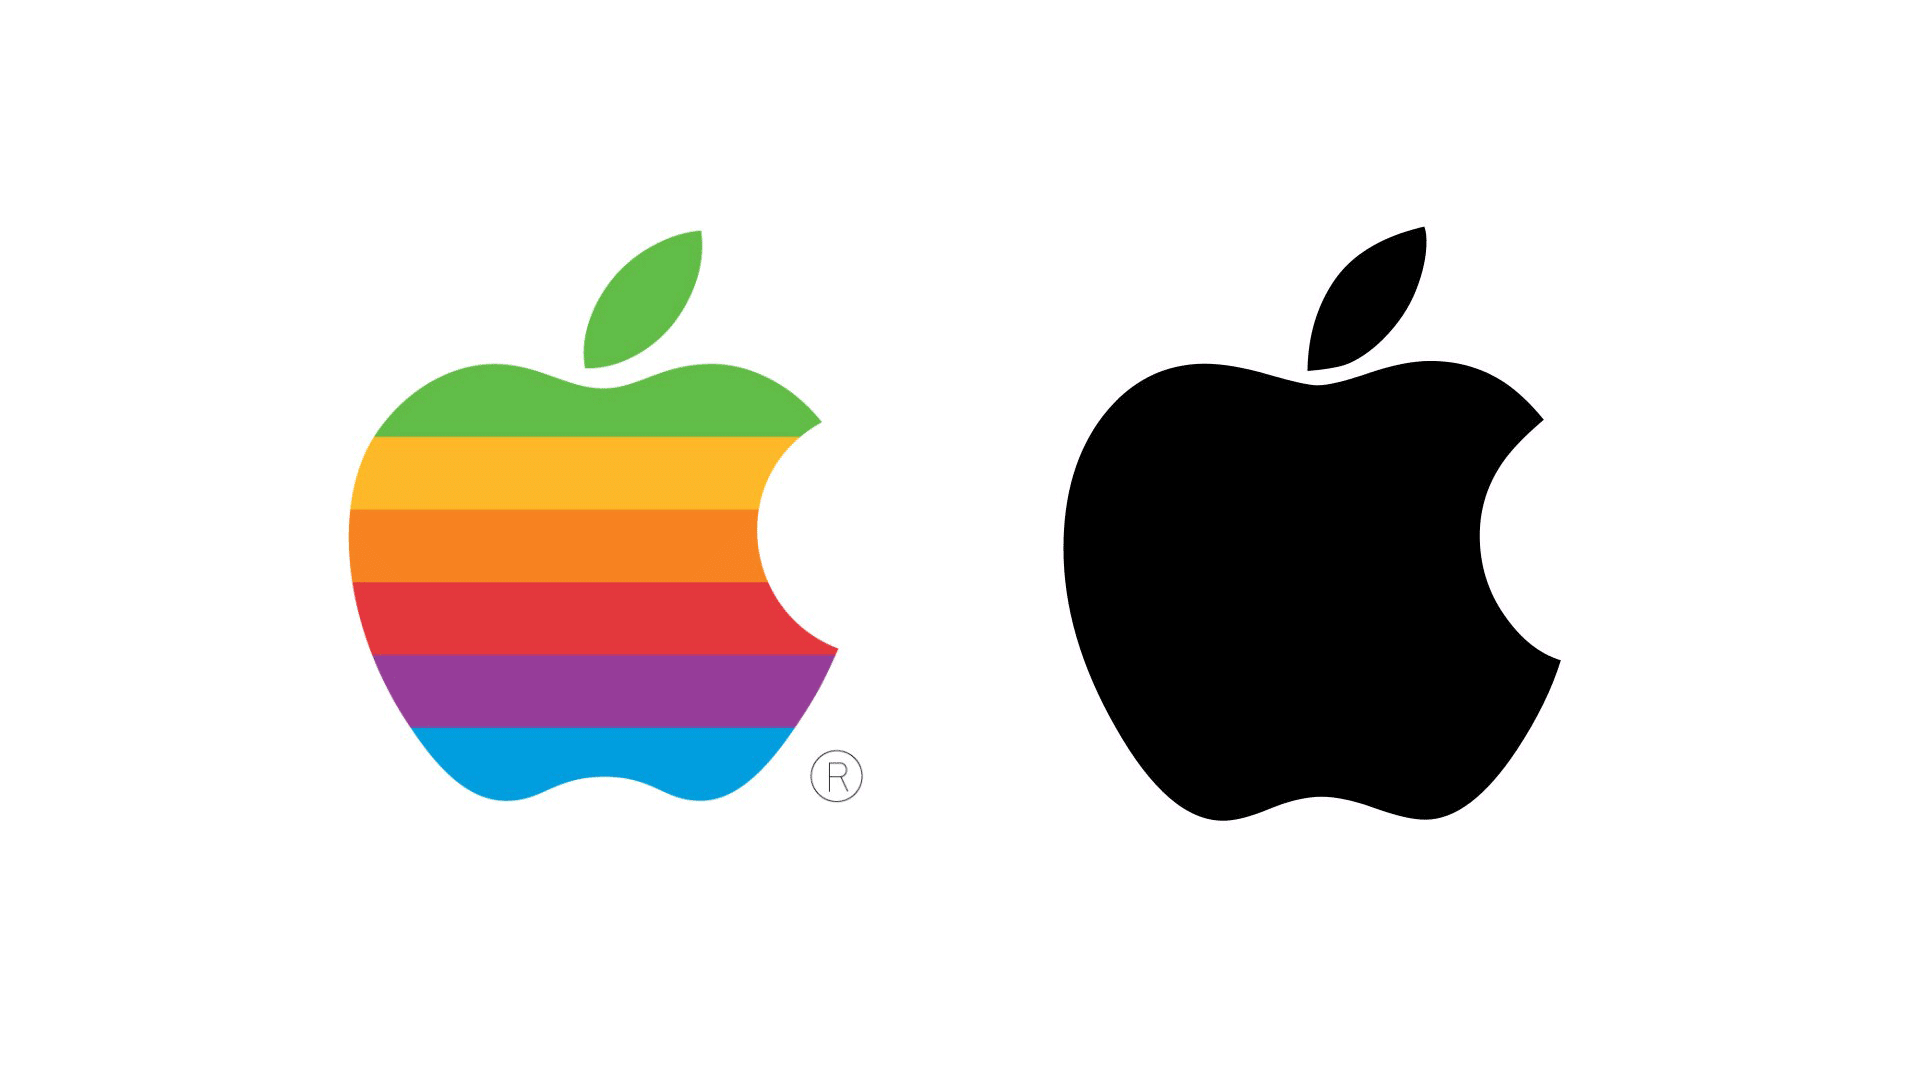 Old and new Apple logos